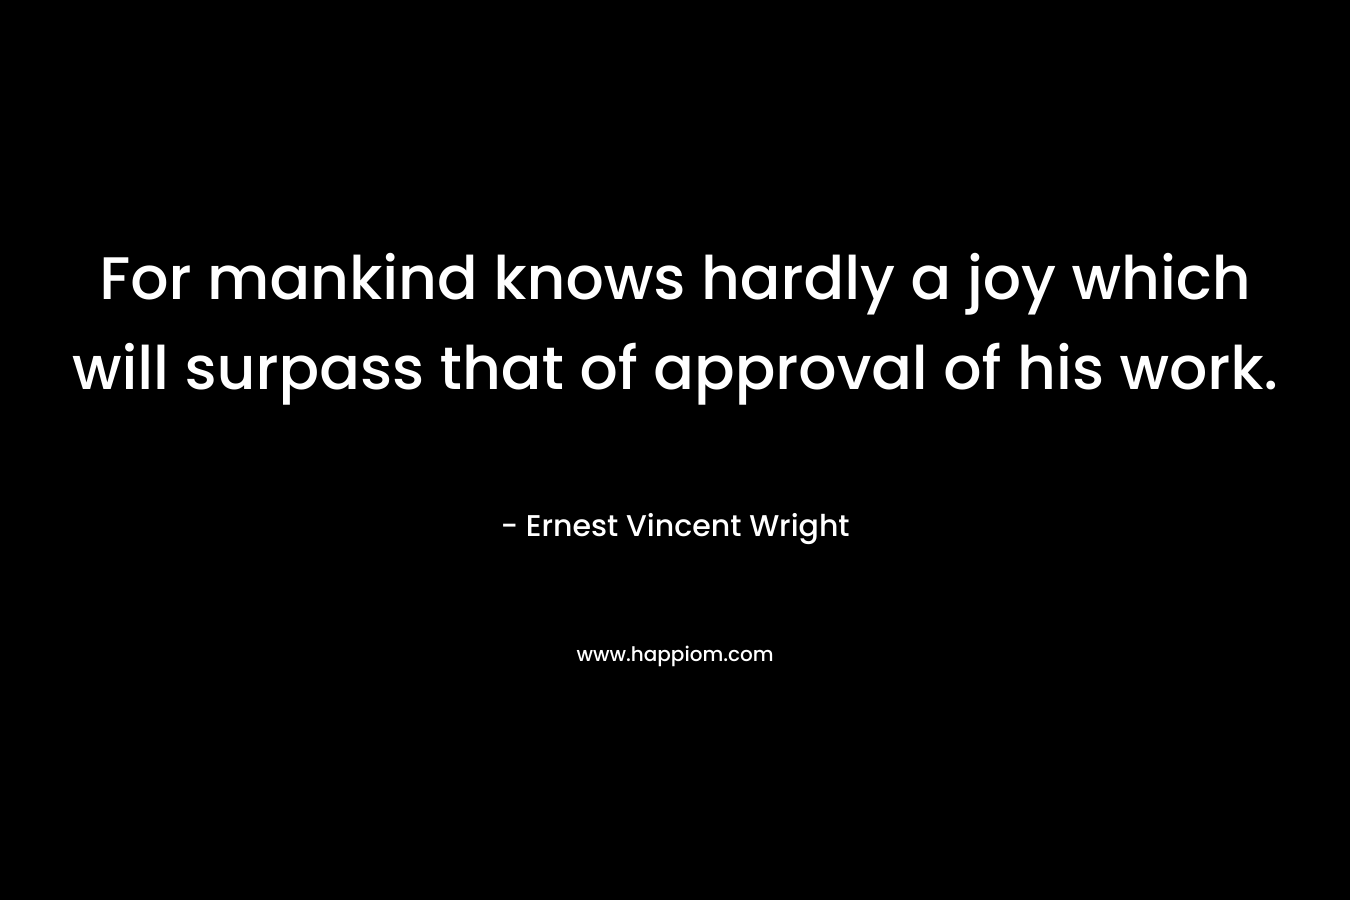 For mankind knows hardly a joy which will surpass that of approval of his work.